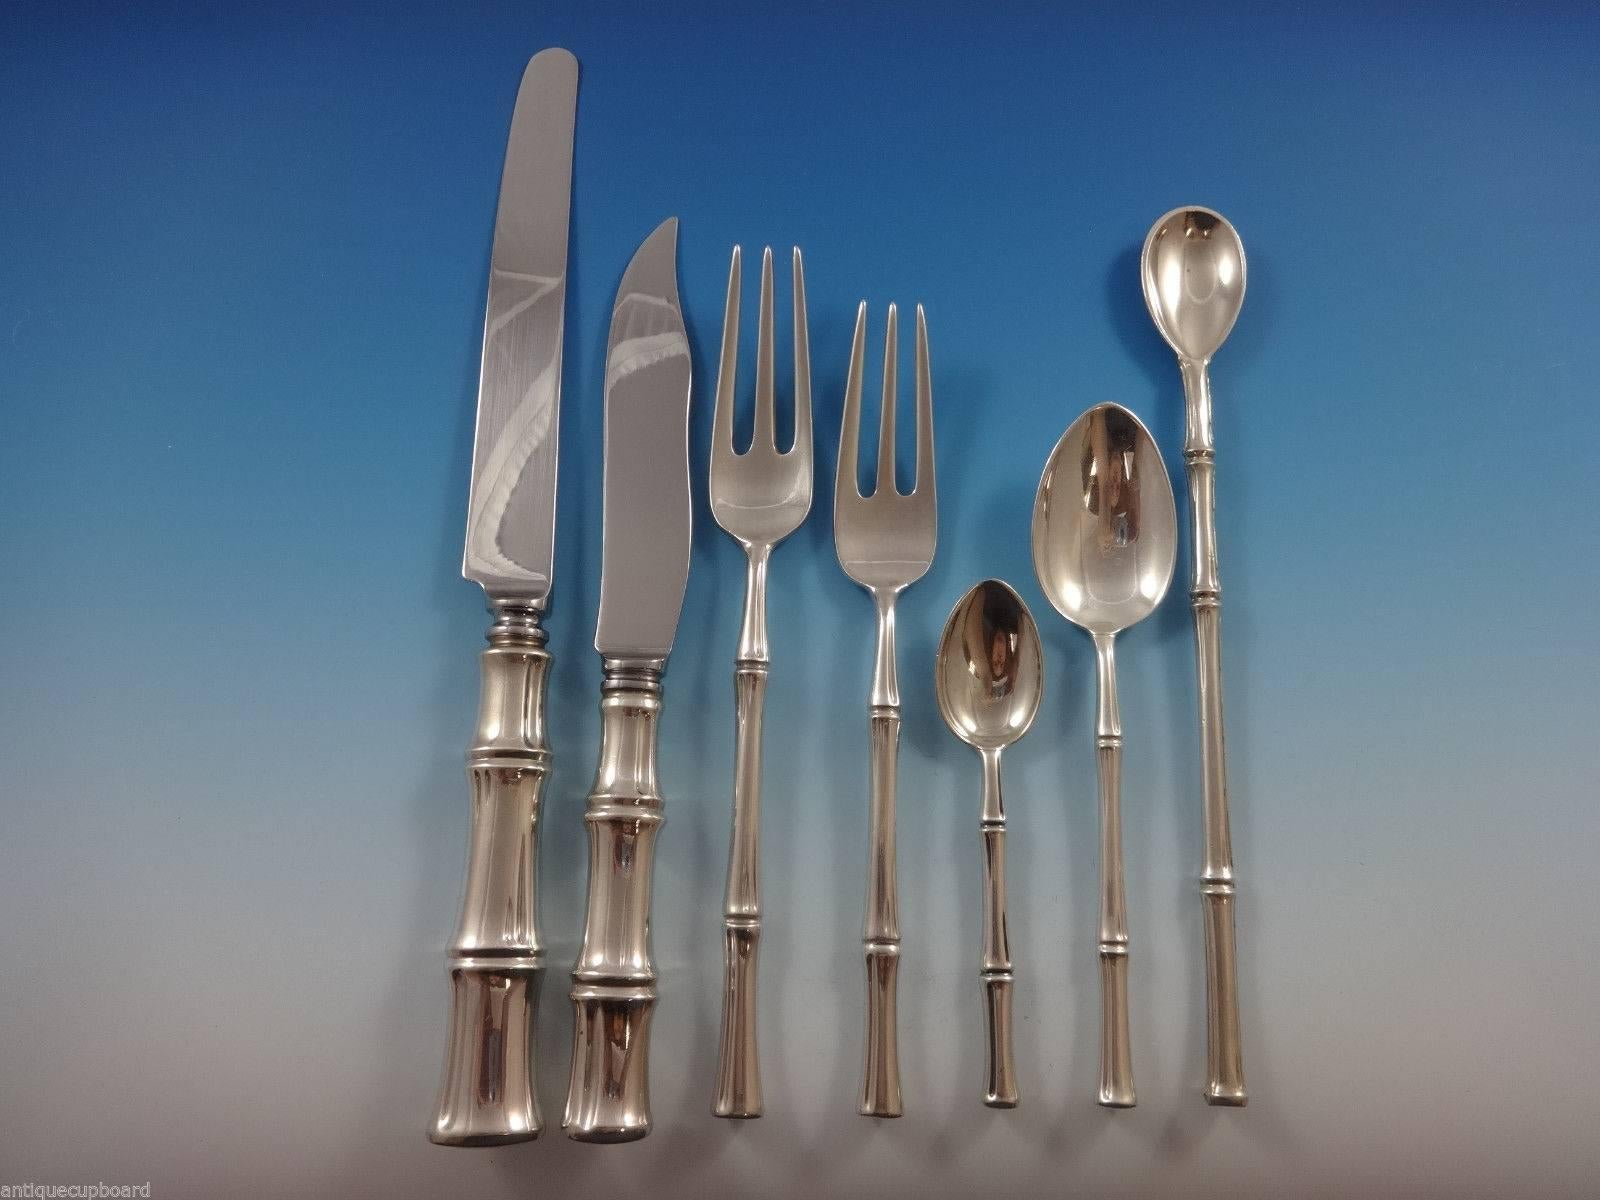 BAMBOO BY TIFFANY & CO. sterling silver Flatware set - 59 pieces. This pattern was designed by Van Day Truex for Tiffany & Company in the year 1961 and features a fabulous 3-D handle in the shape of a bamboo stalk. This set includes:

 
8 DINNER